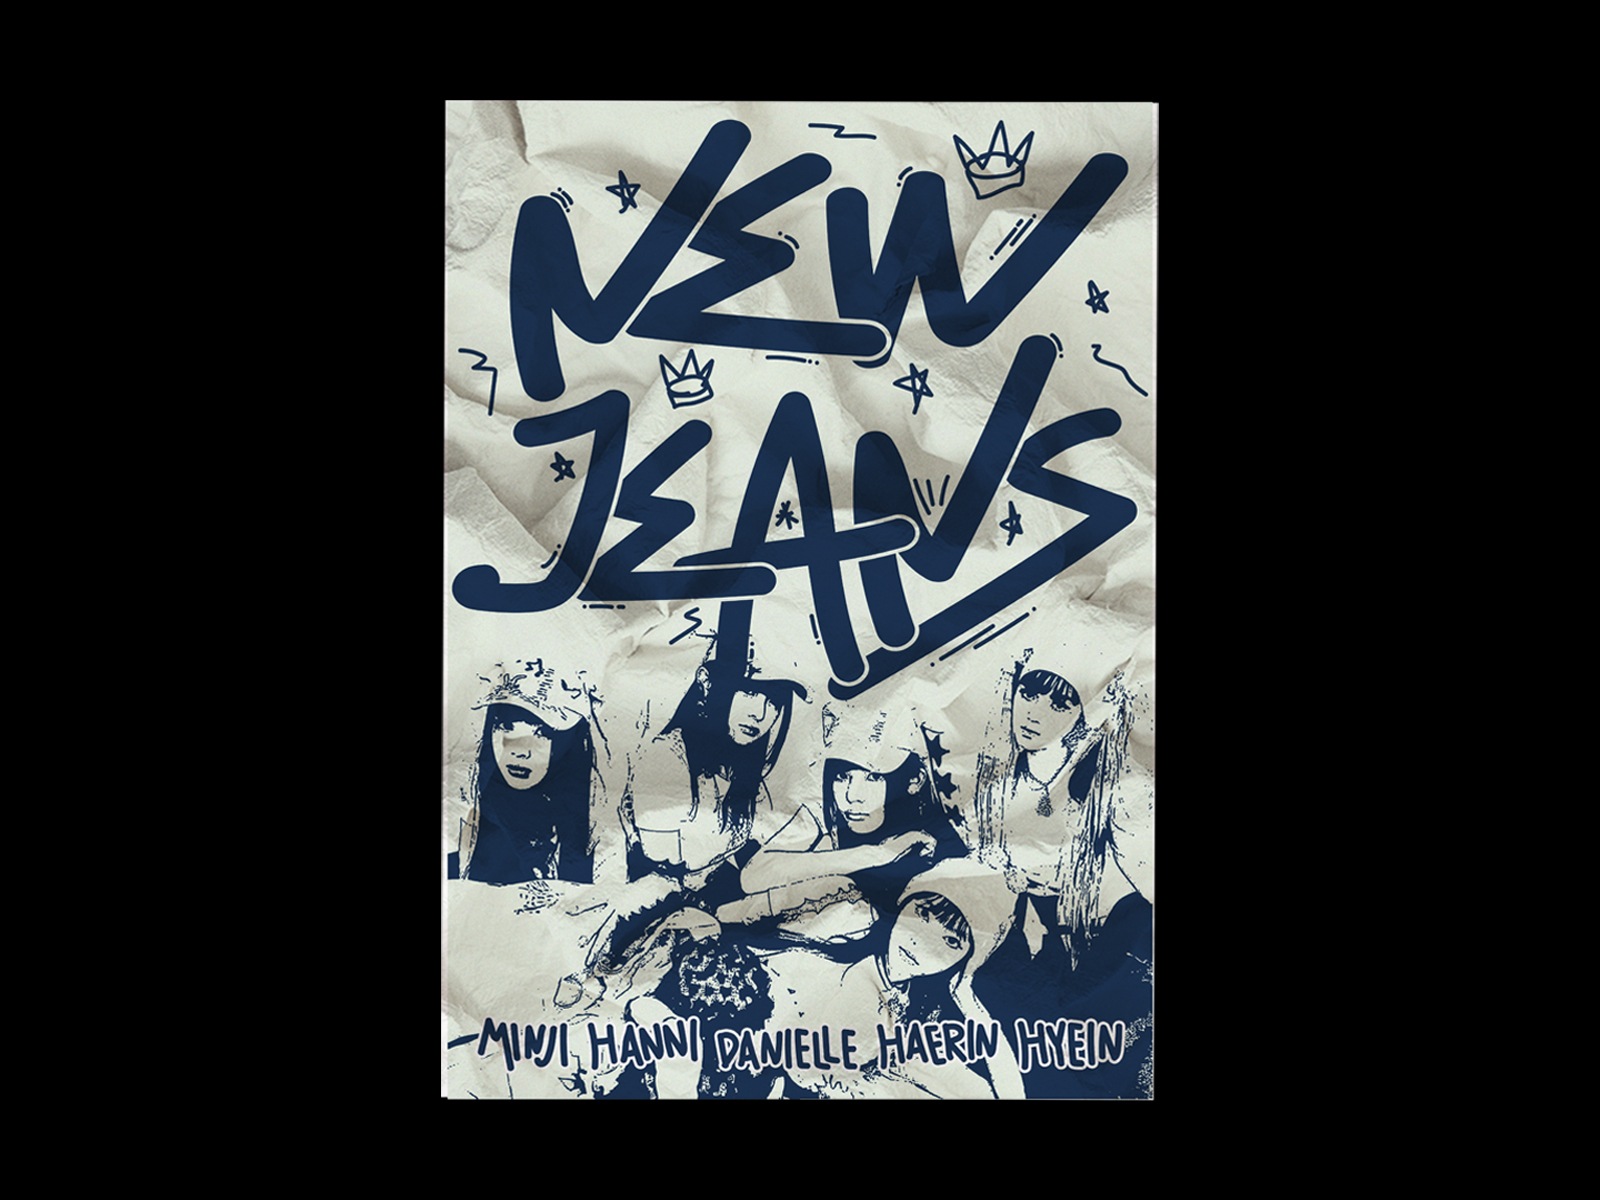 Dribbble - NEW JEANS POSTER drb.jpg by Ciyo Nugroho